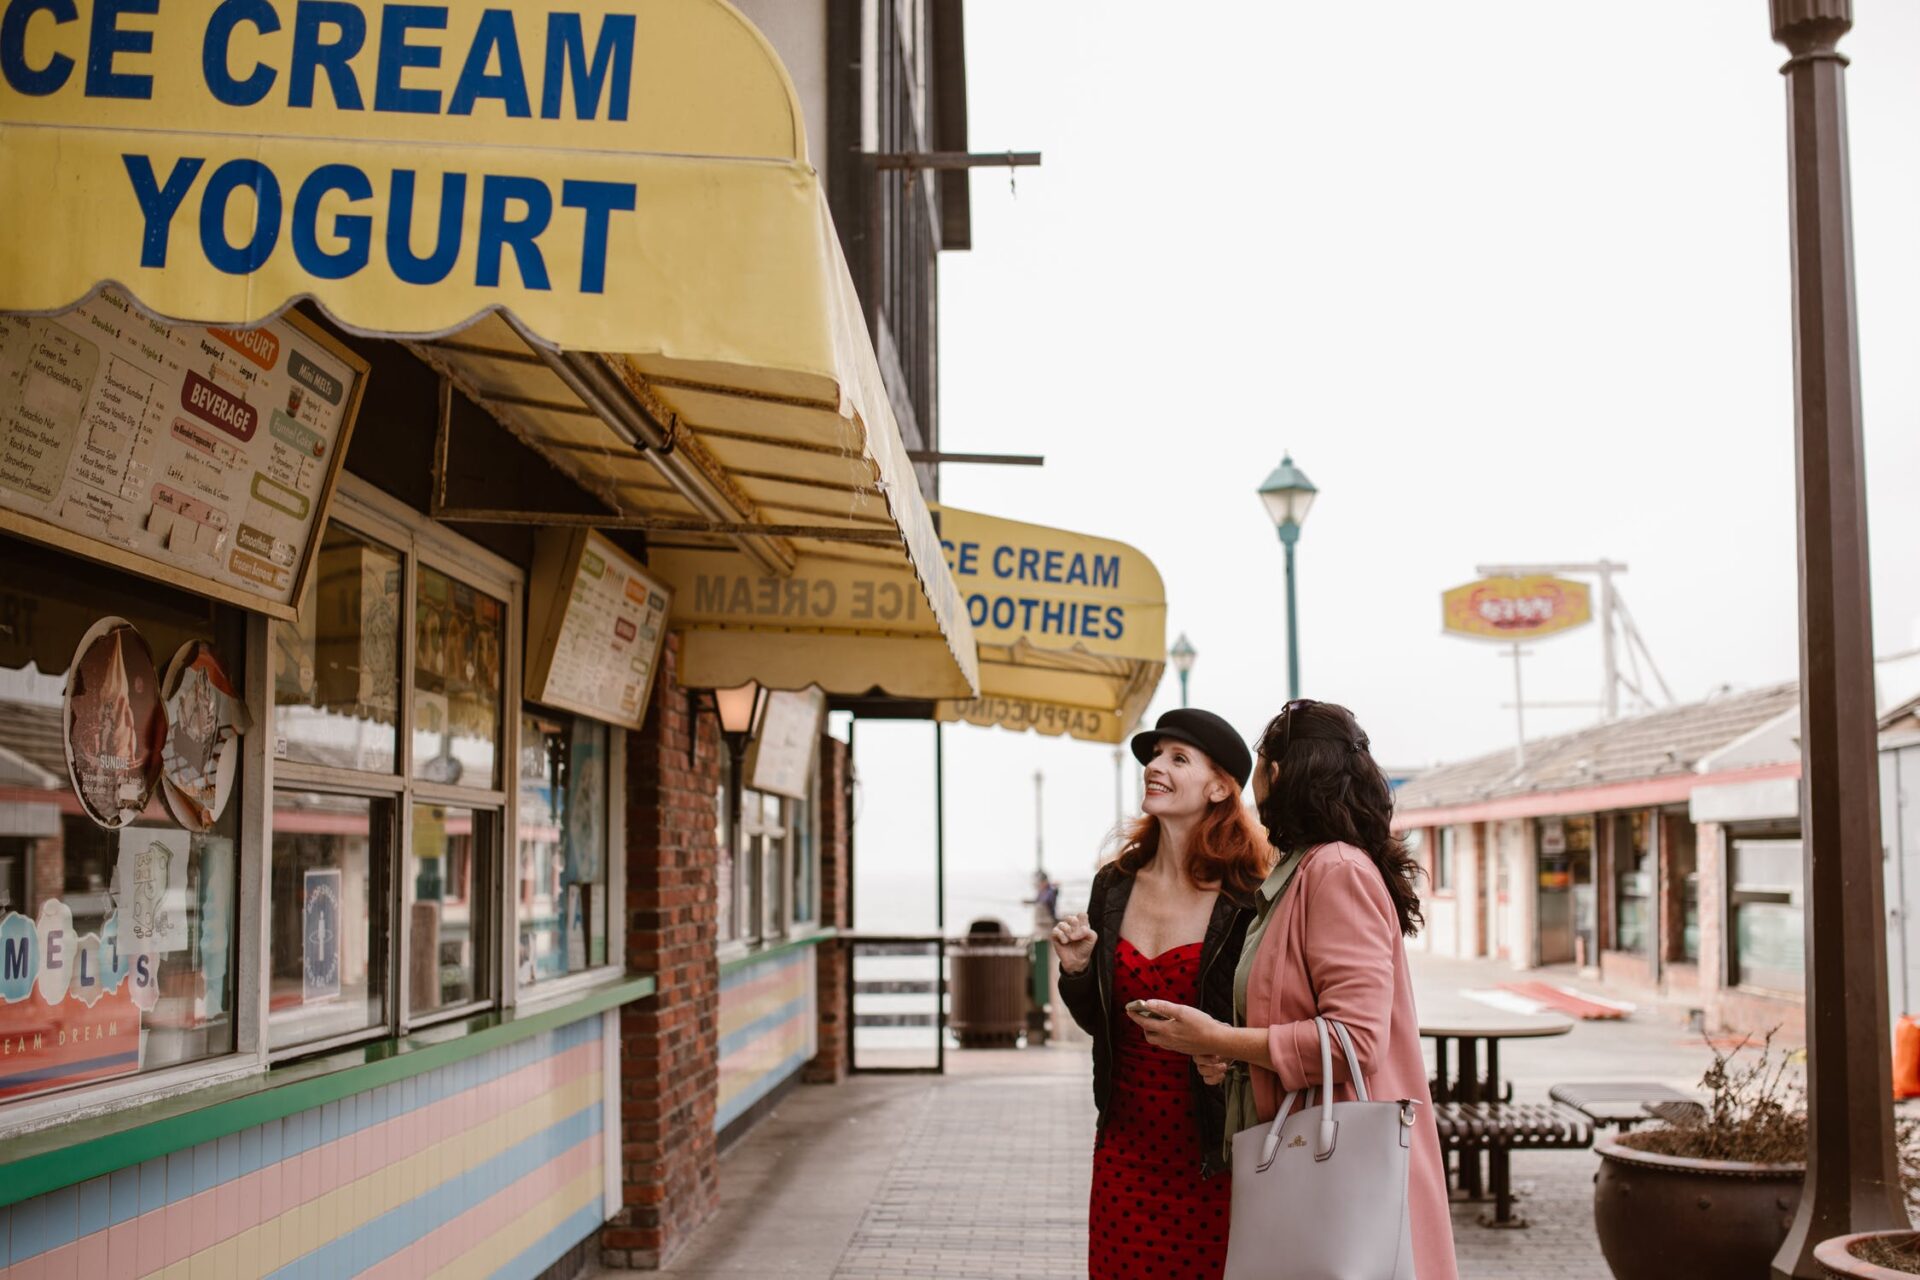 two women, who could be in the age of menopause, stand in front of an ice cream parlor and laugh